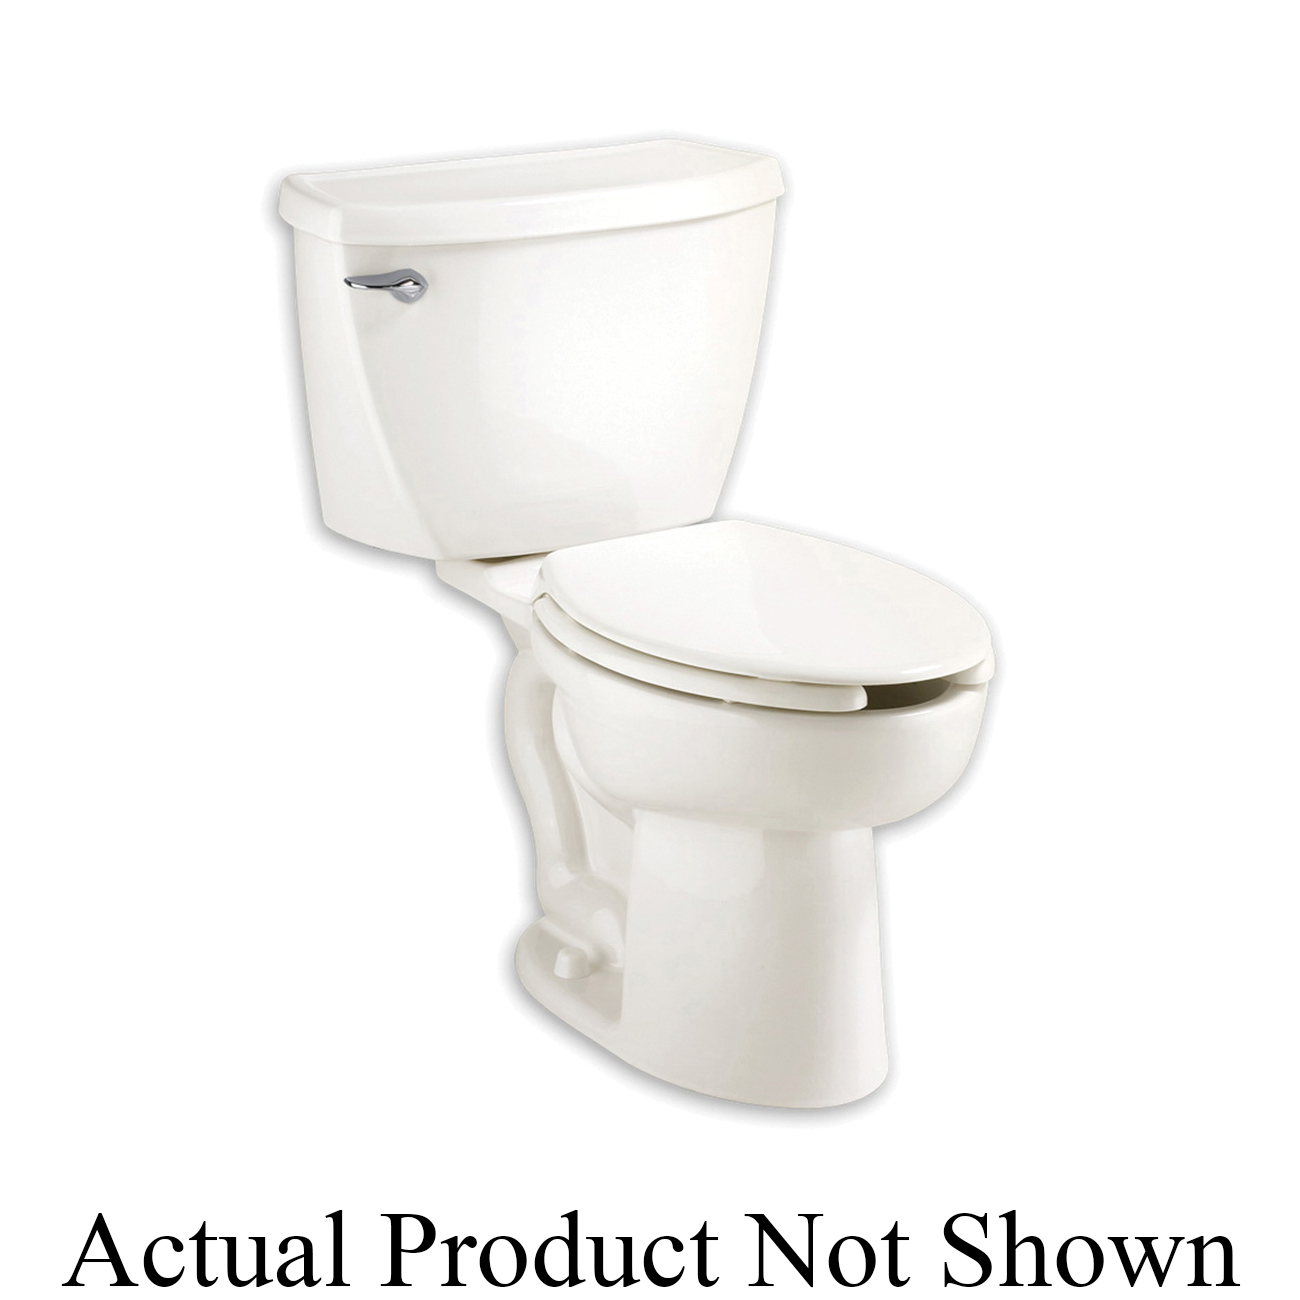 American Standard 3483.001.020 Cadet® FloWise® Right Height™ Toilet Bowl, White, Elongated Shape, 12 in Rough-In, 16-1/2 in H Rim, 2-1/8 in Trapway